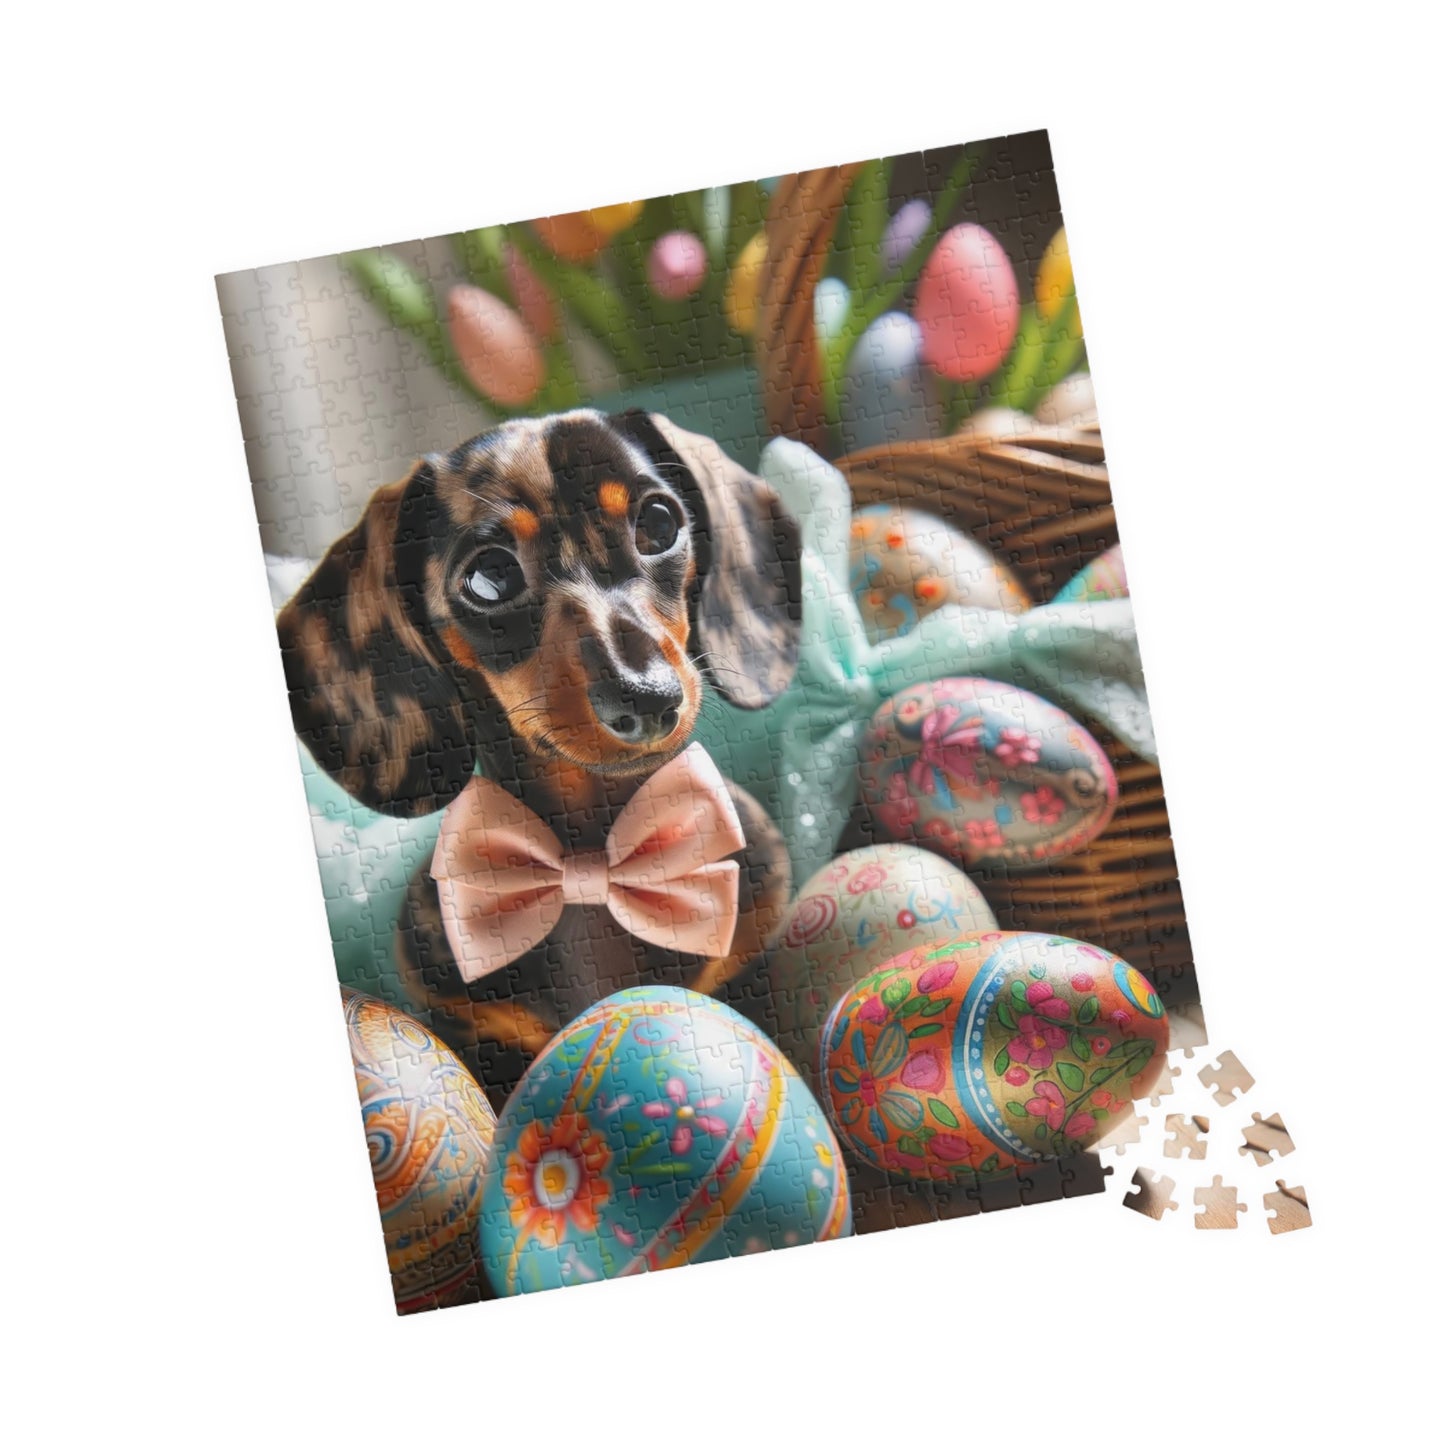 Charming Easter Elegance Miniature Dachshund Jigsaw Puzzle - Brindle Mini Doxie, Family Fun Activity 110, 252, 520 or 1014 Pieces